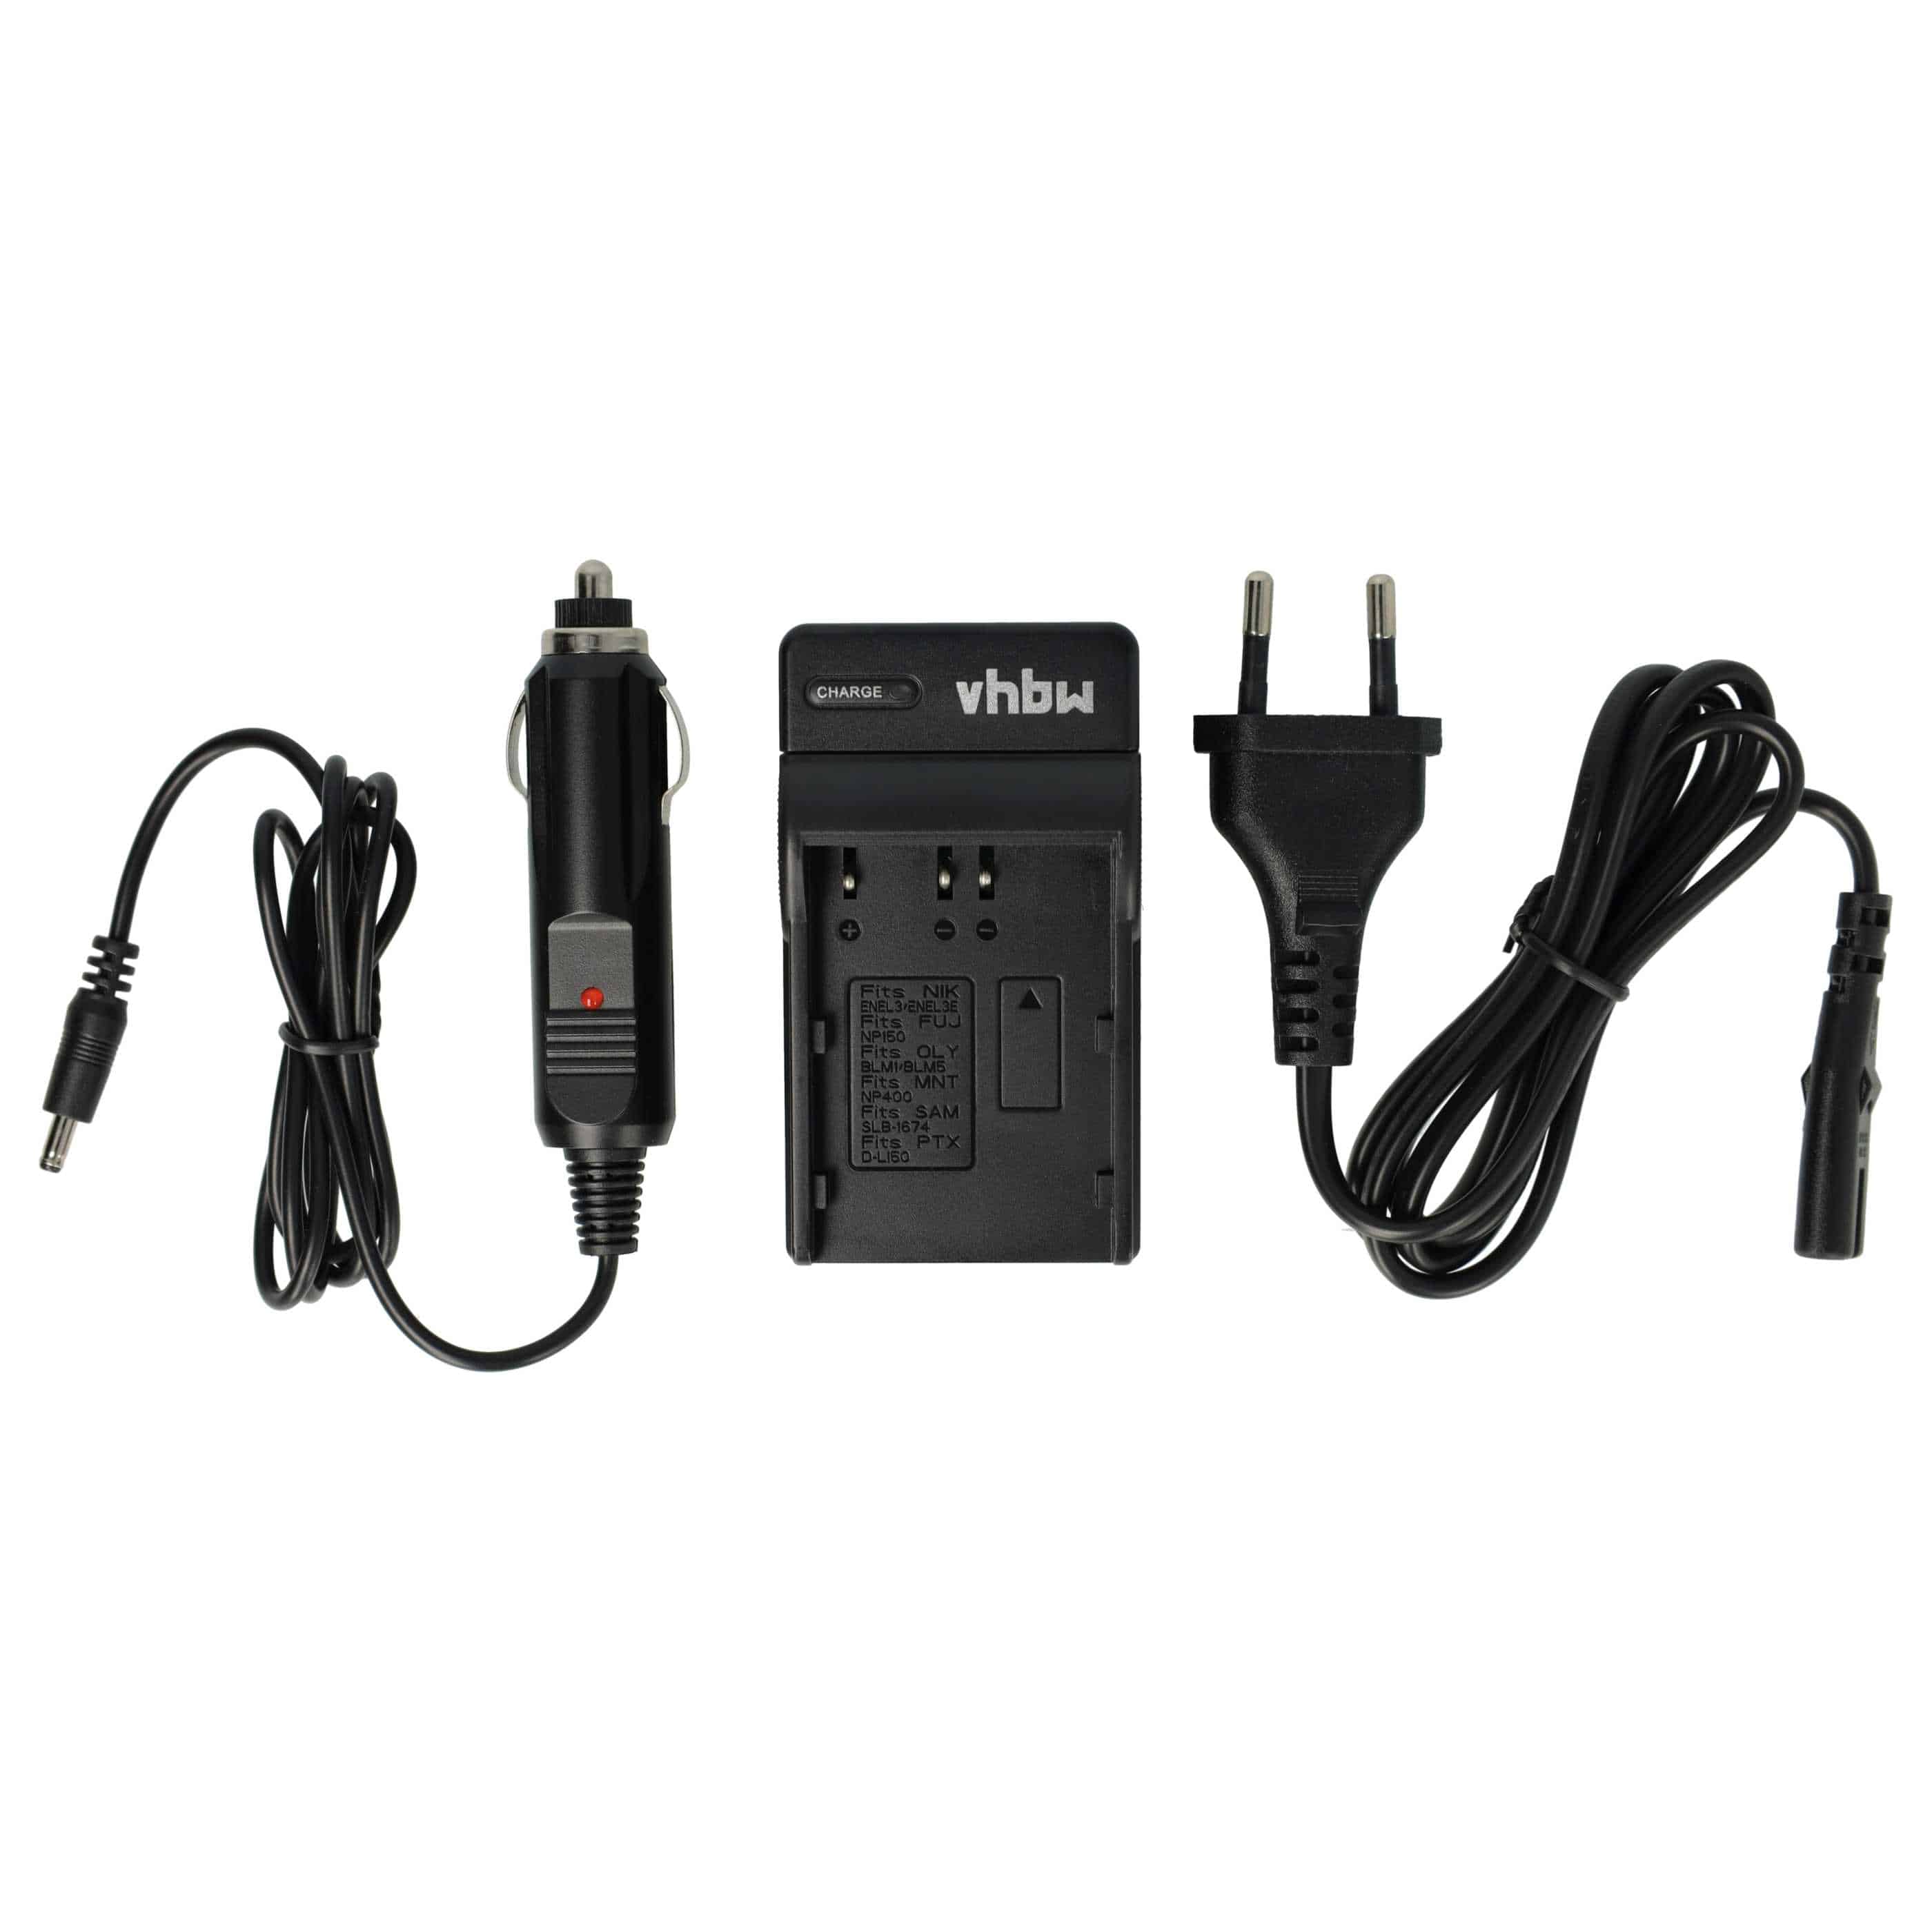 Battery Charger suitable for FinePix S5 Pro Camera etc. - 0.6 A, 8.4 V